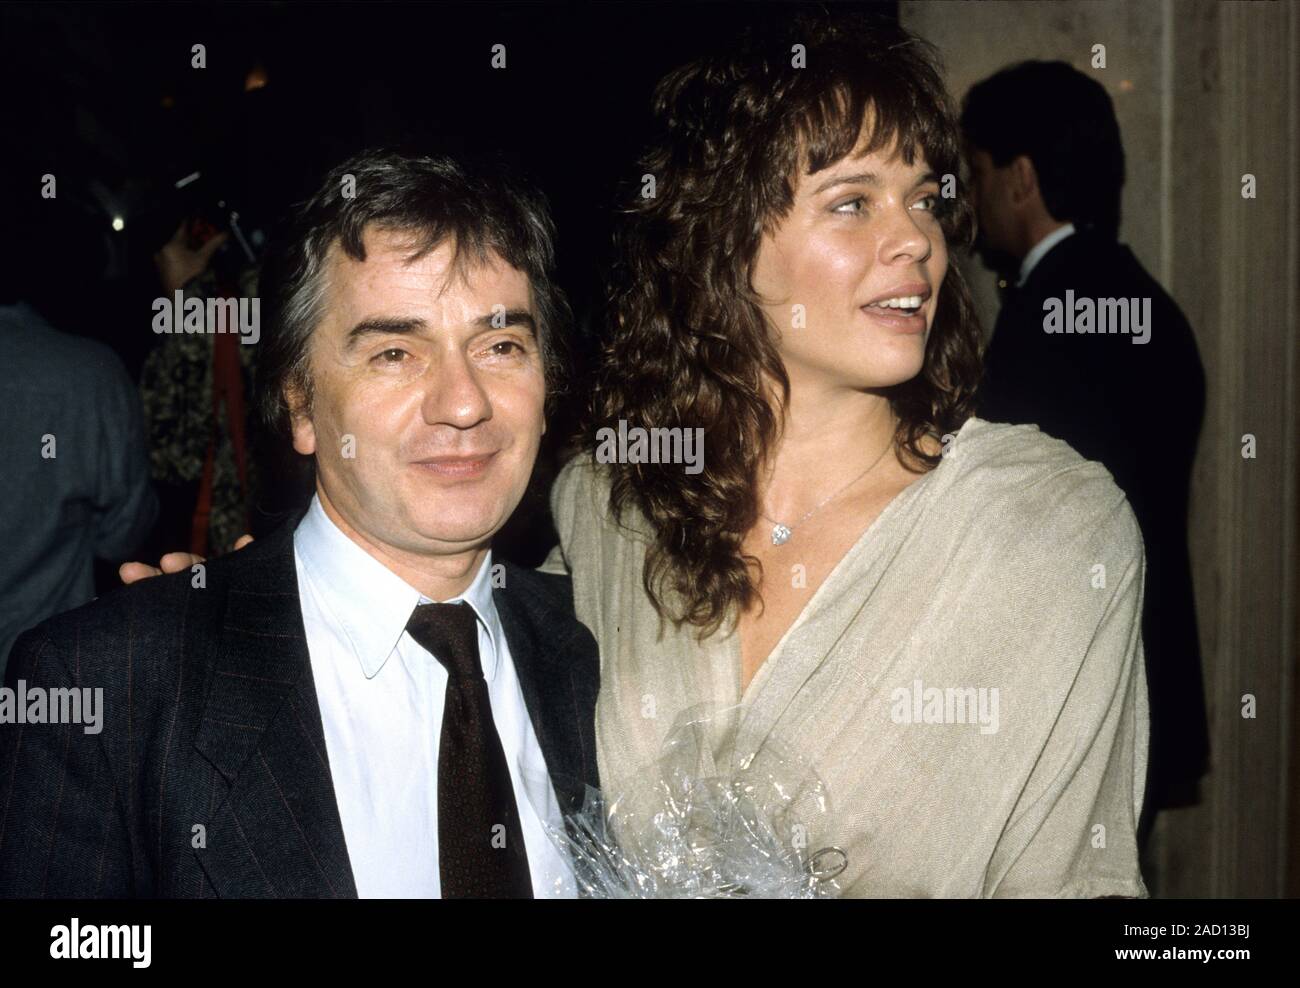 Comedian, musician and actor Dudley moore and his wife Brogan Lane arrive for lunch with TRH Duke and Duchess of York LA 1988. Stock Photo